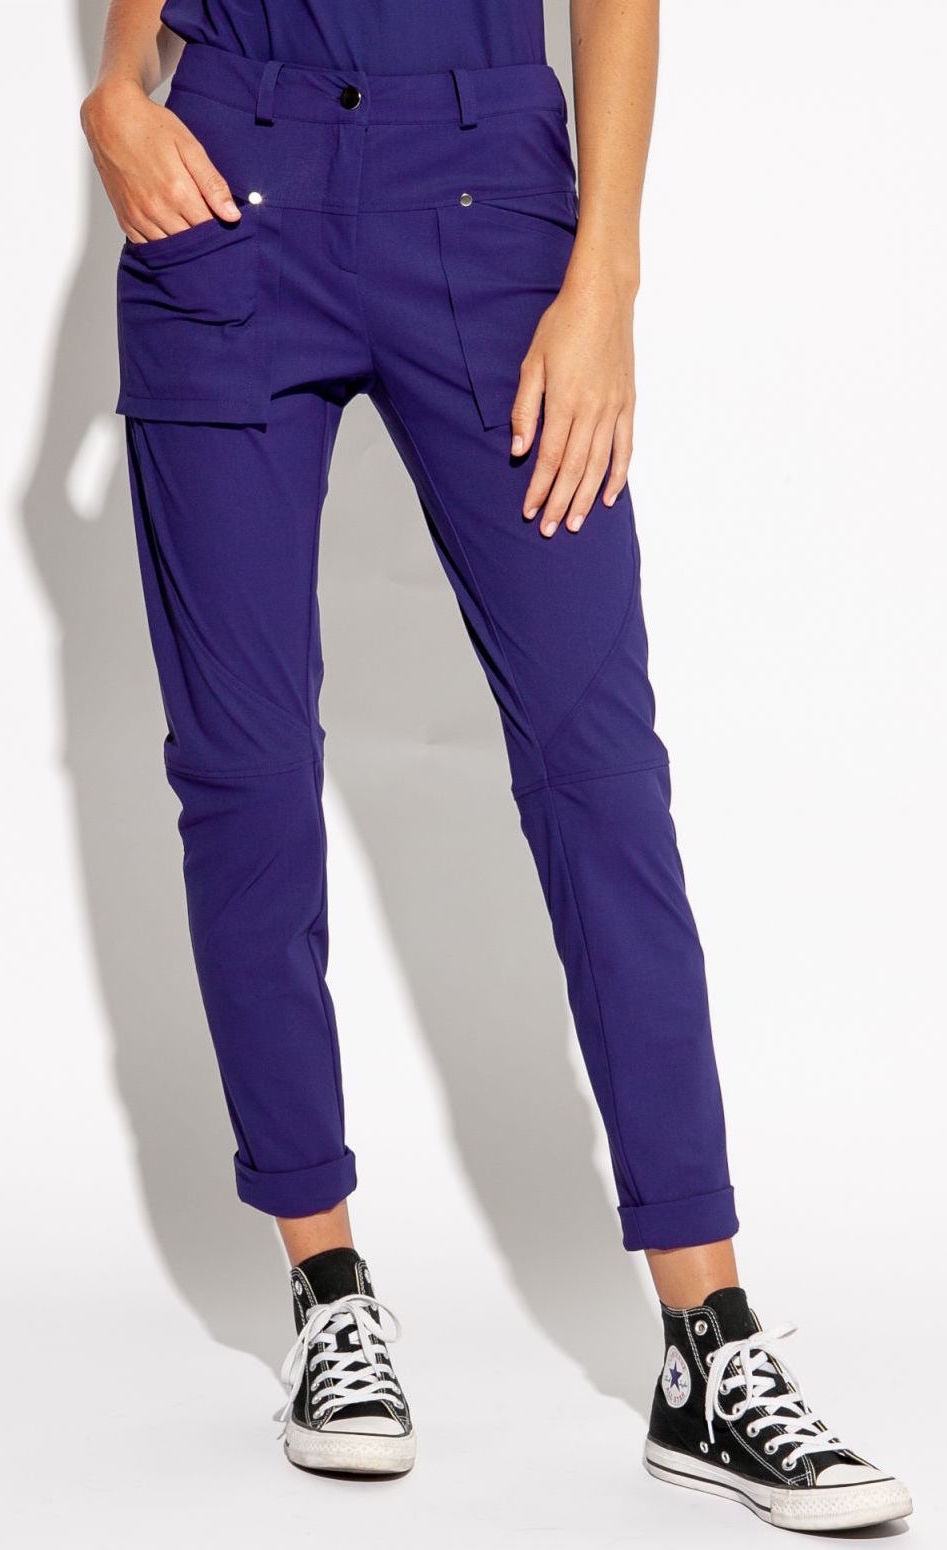 Front bottom half view of a woman wearing the indies nico pant in the color indigo. This pant has two front patch pockets. The model has her hand in the right front pocket. The pant also has seams on the knees and a cuffed hem that ends above the ankles.